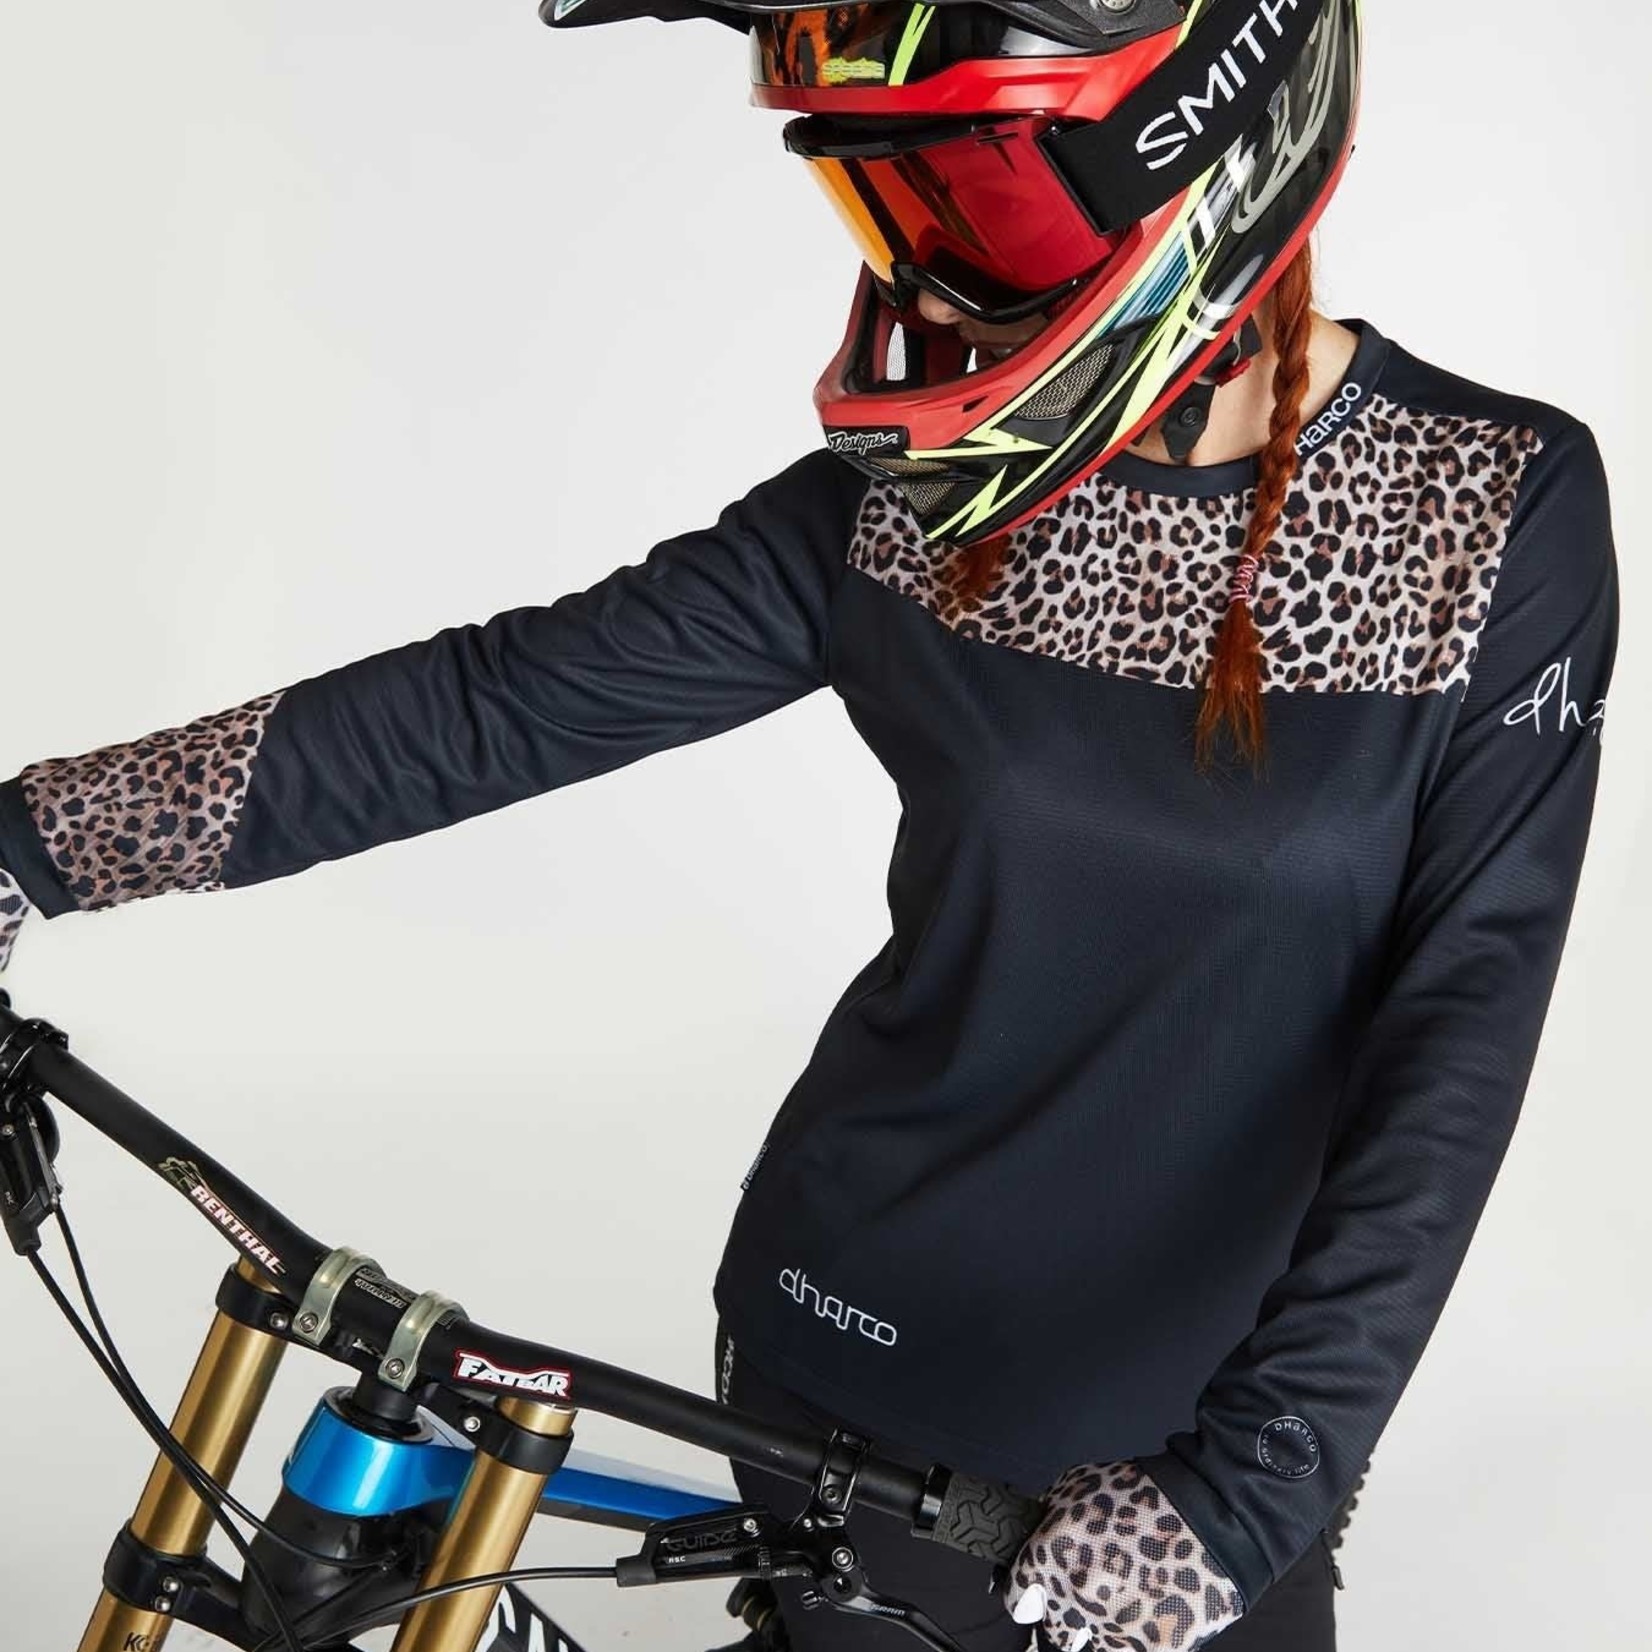 DHaRCO DHaRCO Womens Gravity Jersey Leopard M